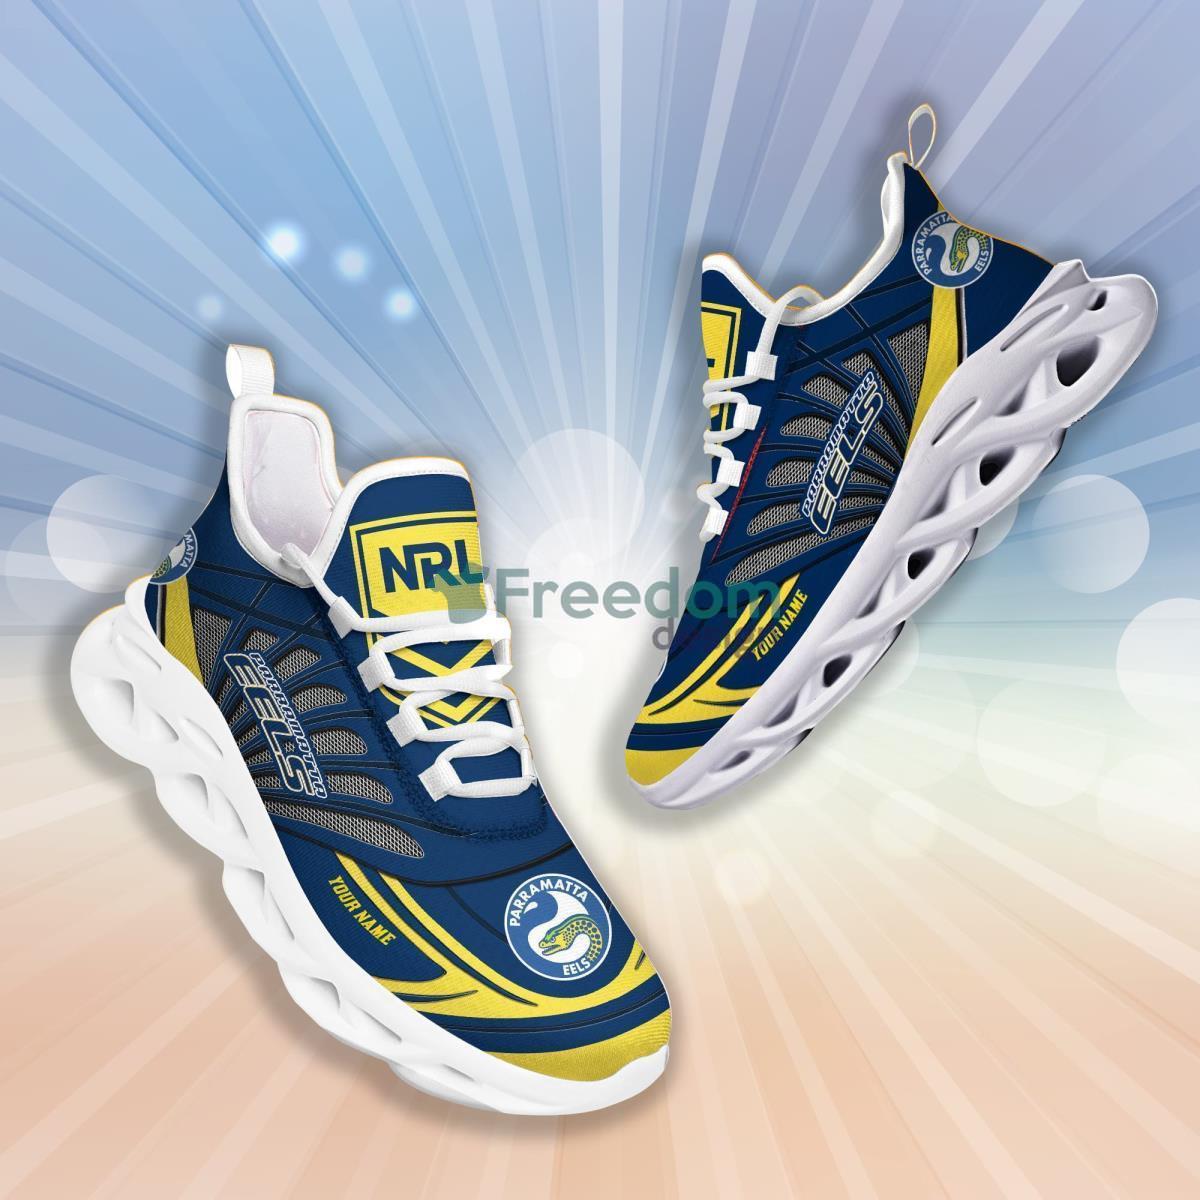 Parramatta Eels Custom Name Clunky Max Soul Shoes For Men and Women